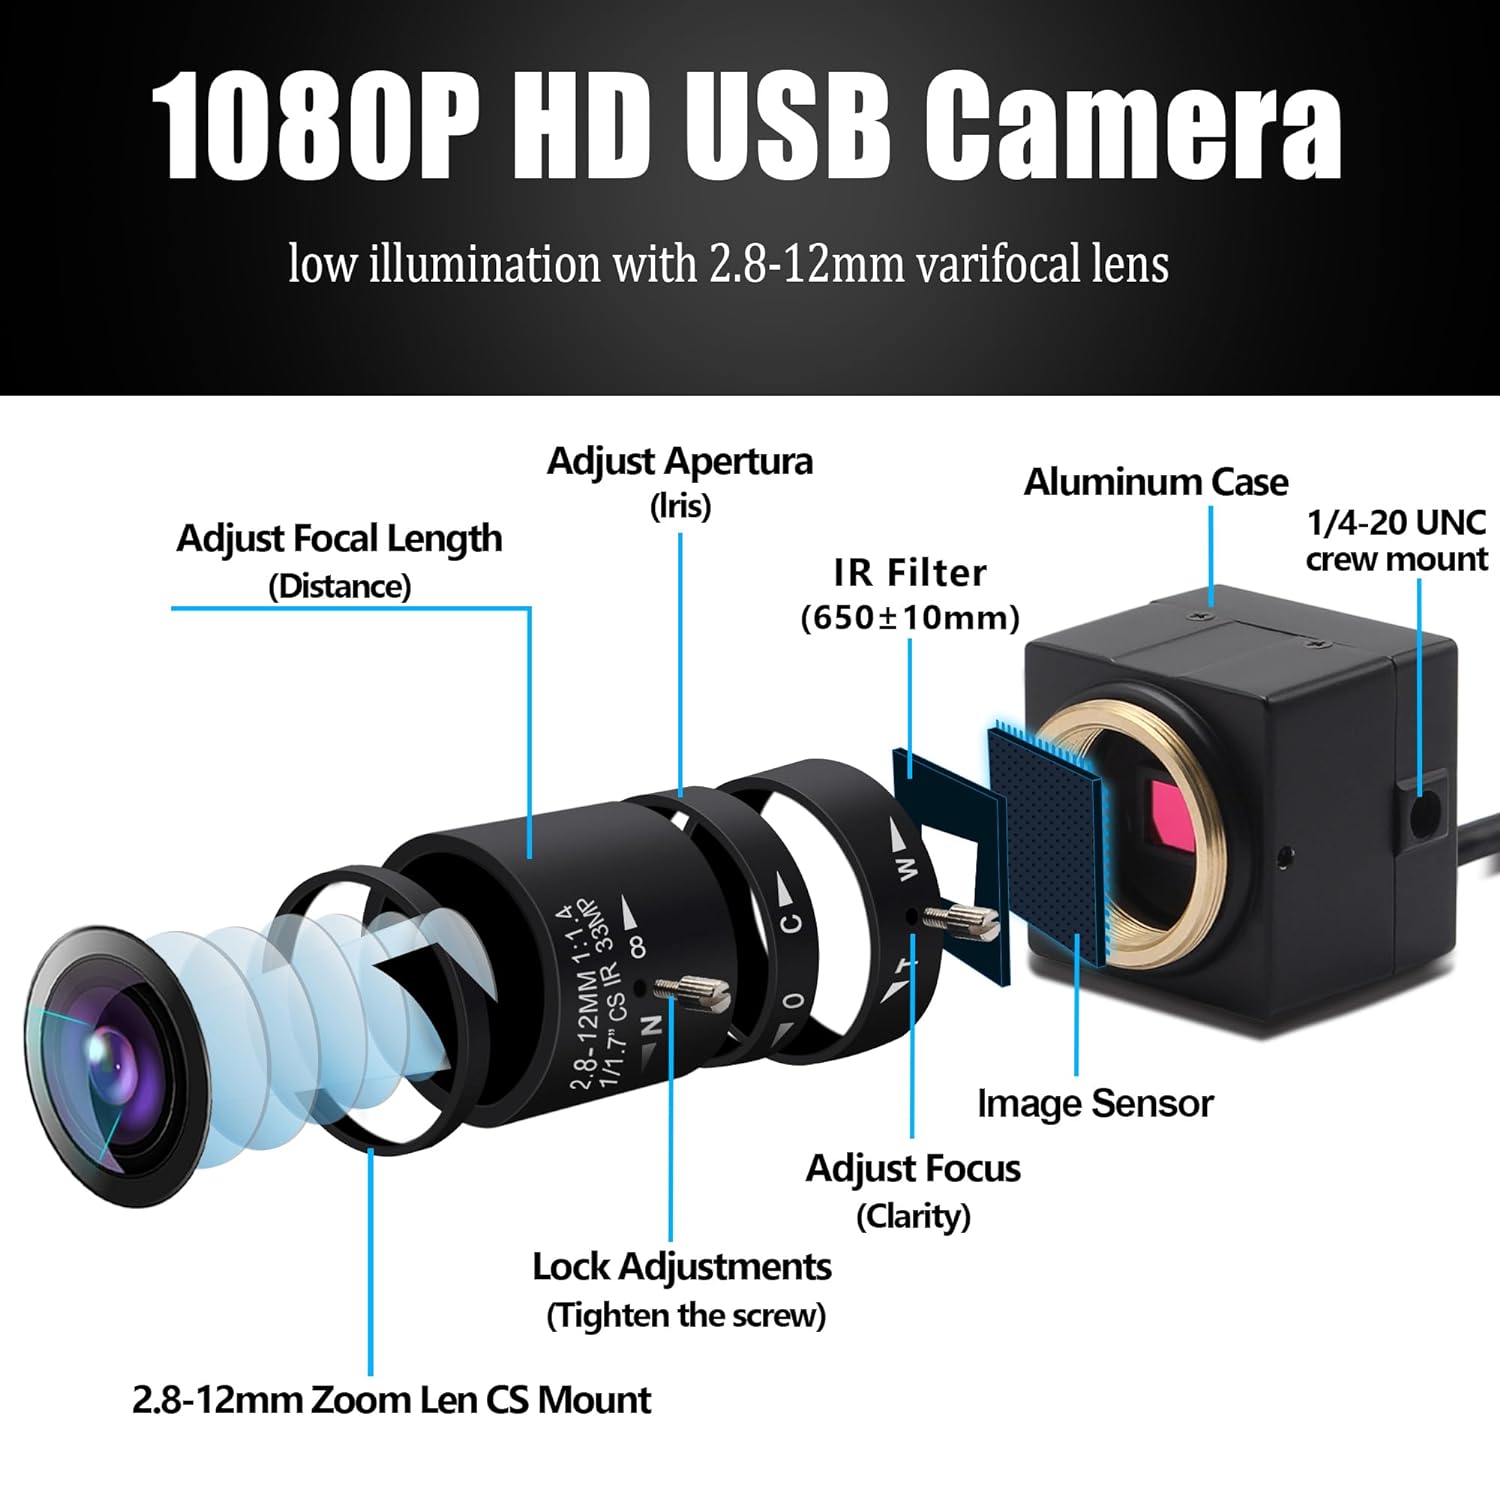 Magnolia HD 1080P Low Illumination USB Camera with 2.8-12mm Varifocal Zoom Lens,H.264 Mini Webcam with 1/2.9” IMX323 Sensor for DIY Camera,Home Security Surveillance,conferencing